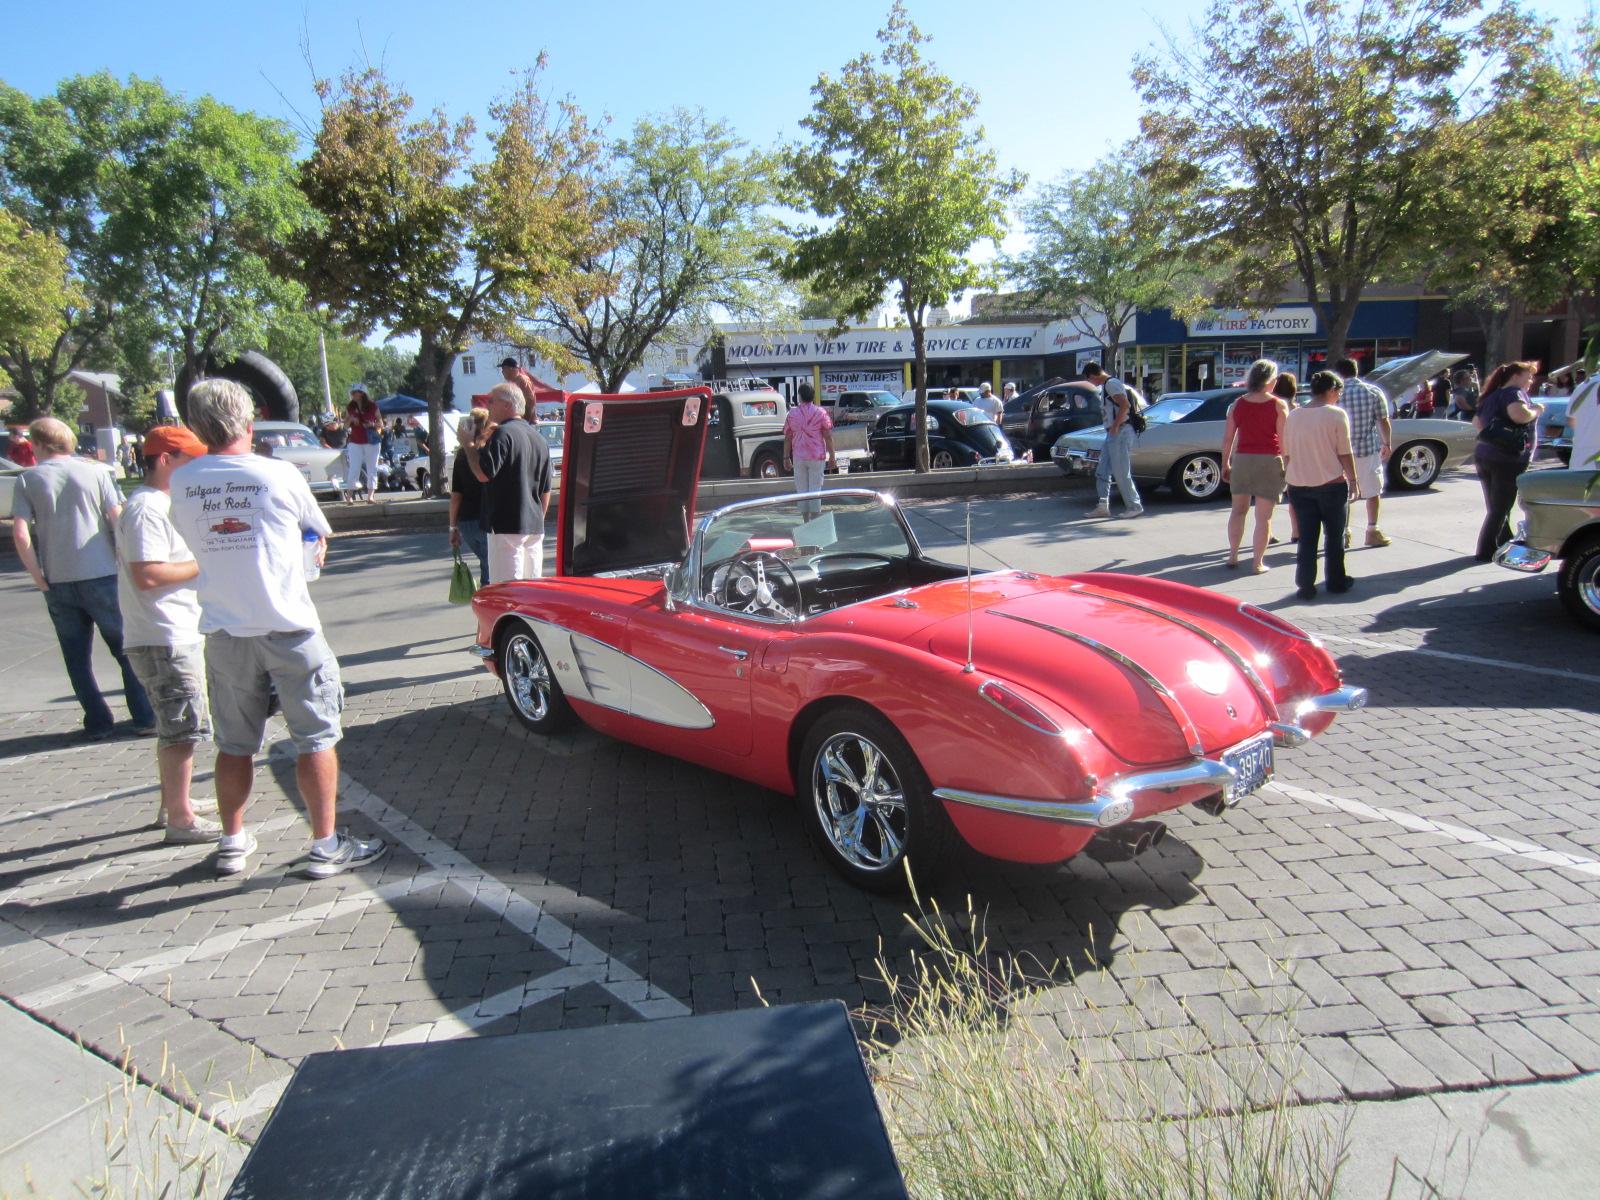 1957 Chevrolet Corvette.  This was my favorite of the show.